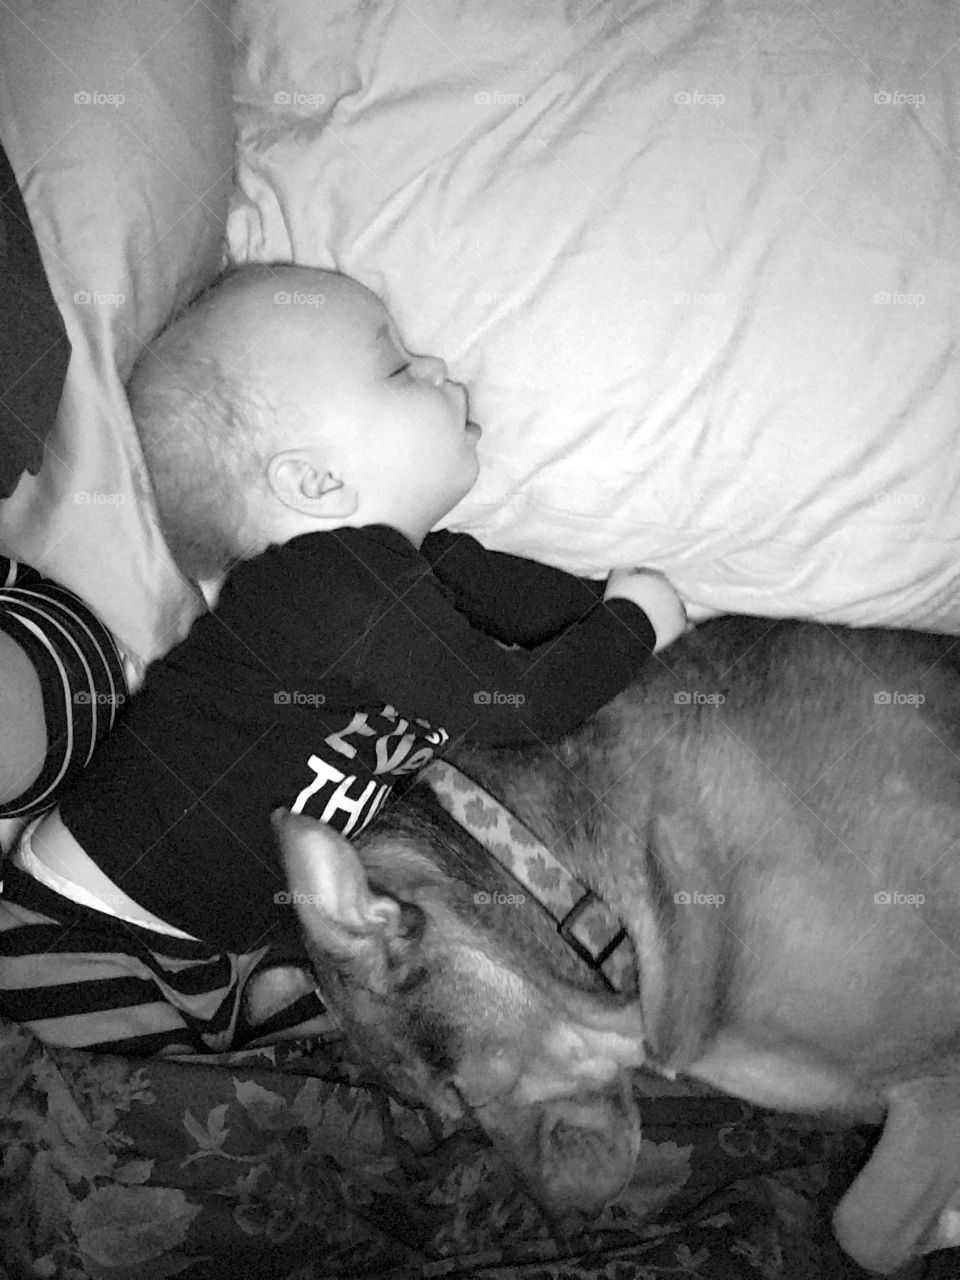 The snuggle is real. A boy and his dog, snuggled so close together in a deep sleep.